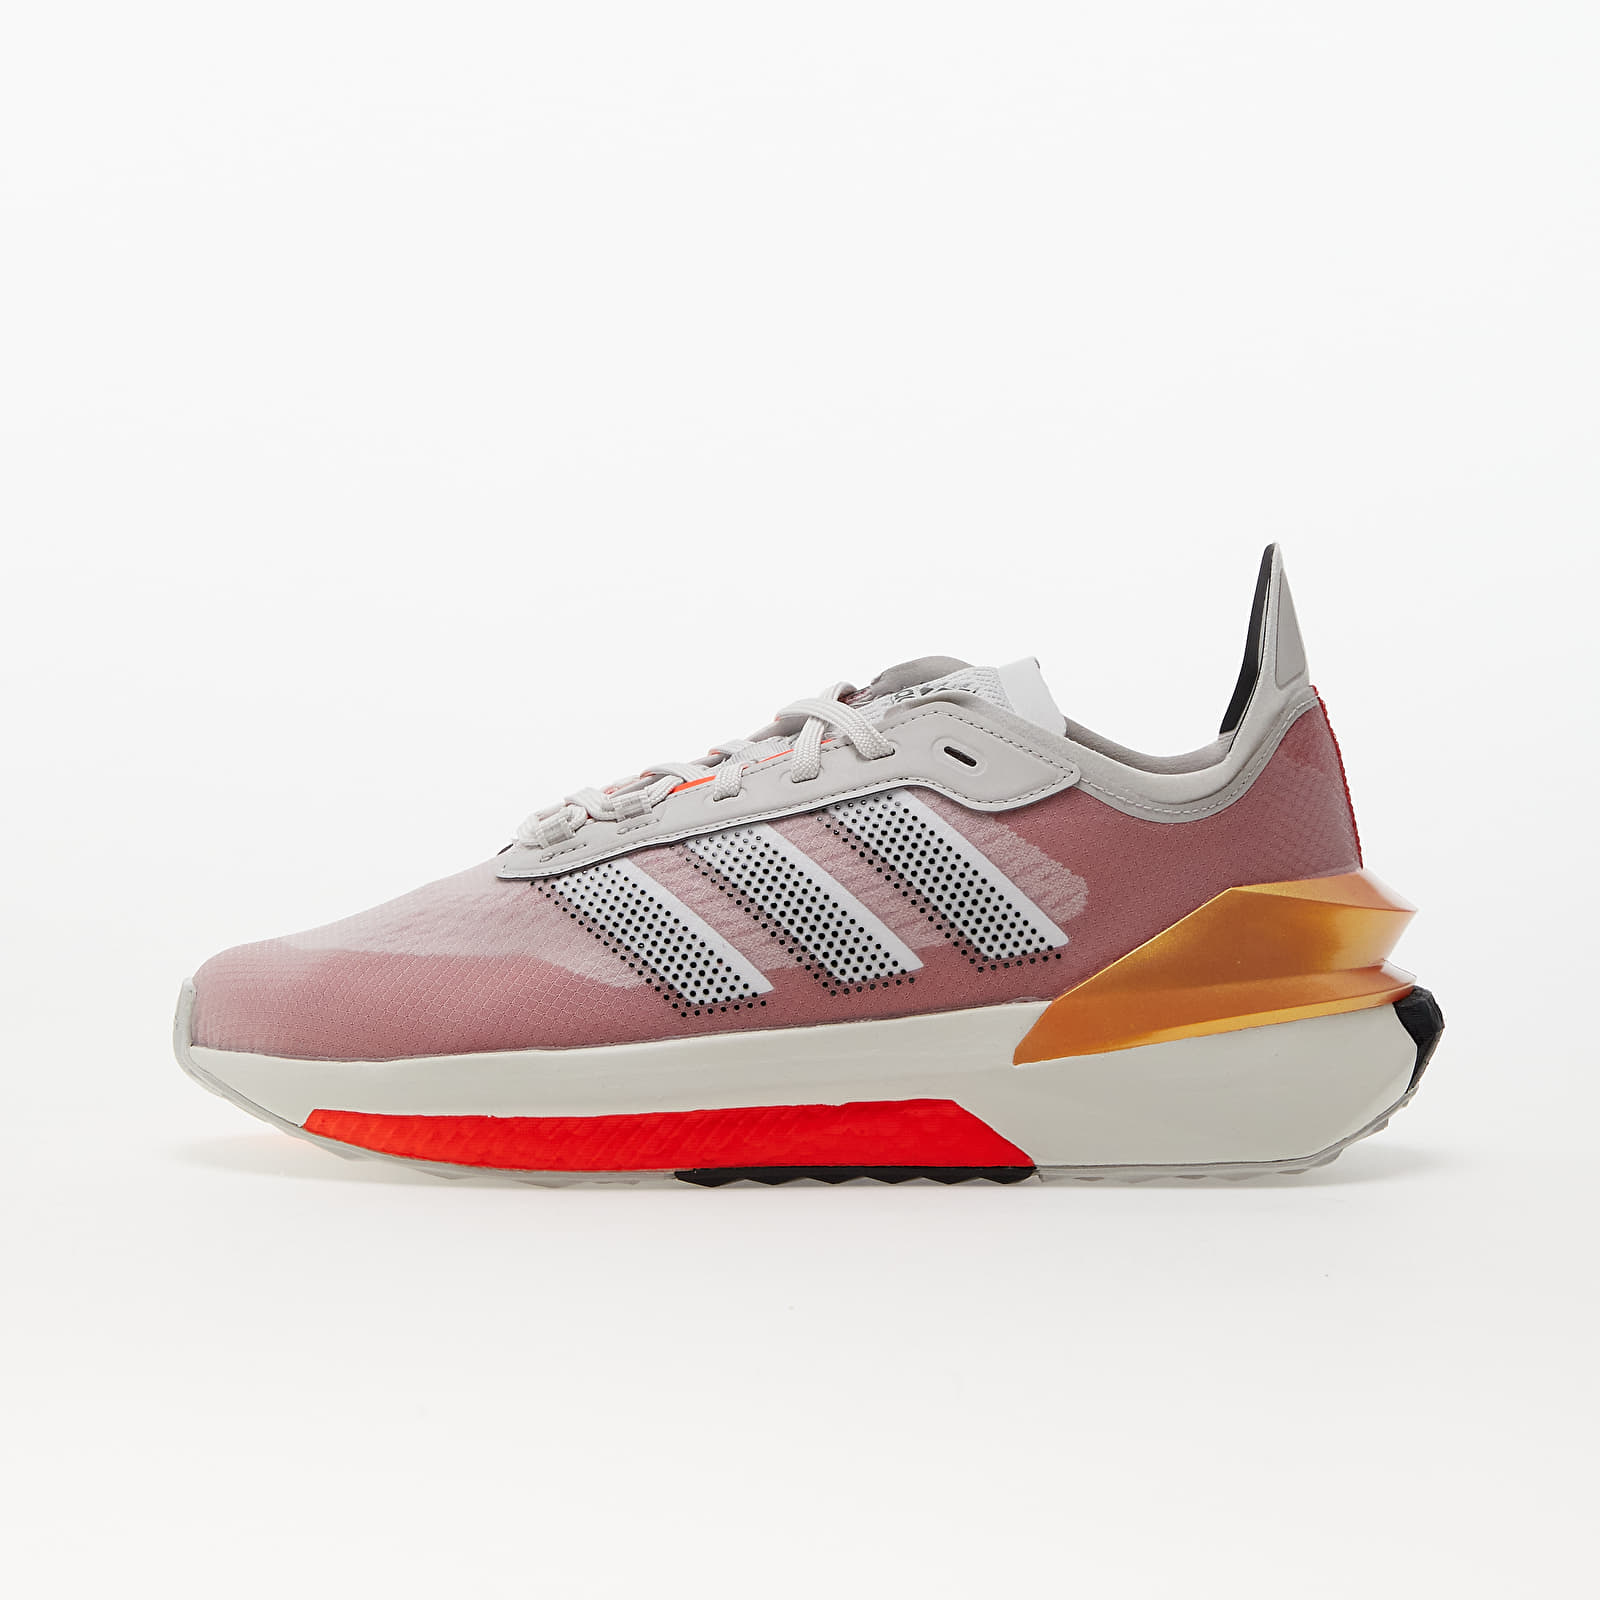 Men's shoes adidas Avryn Grey One/ Ftw White/ Solid Red